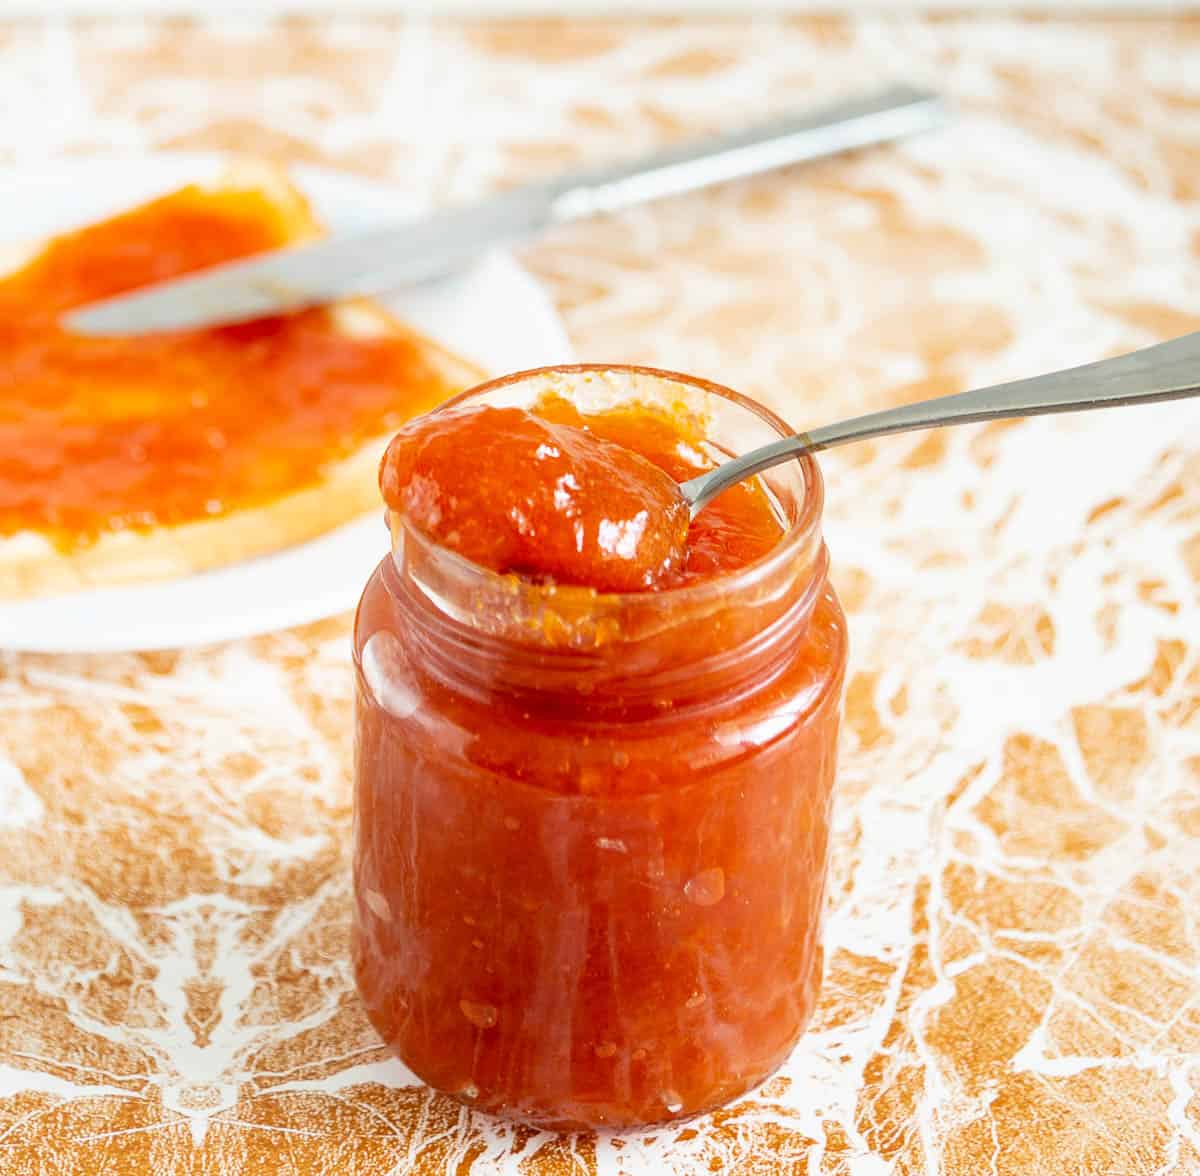 A jar of apricot peach jam and a slice of bread with jam on a plate with a knife.